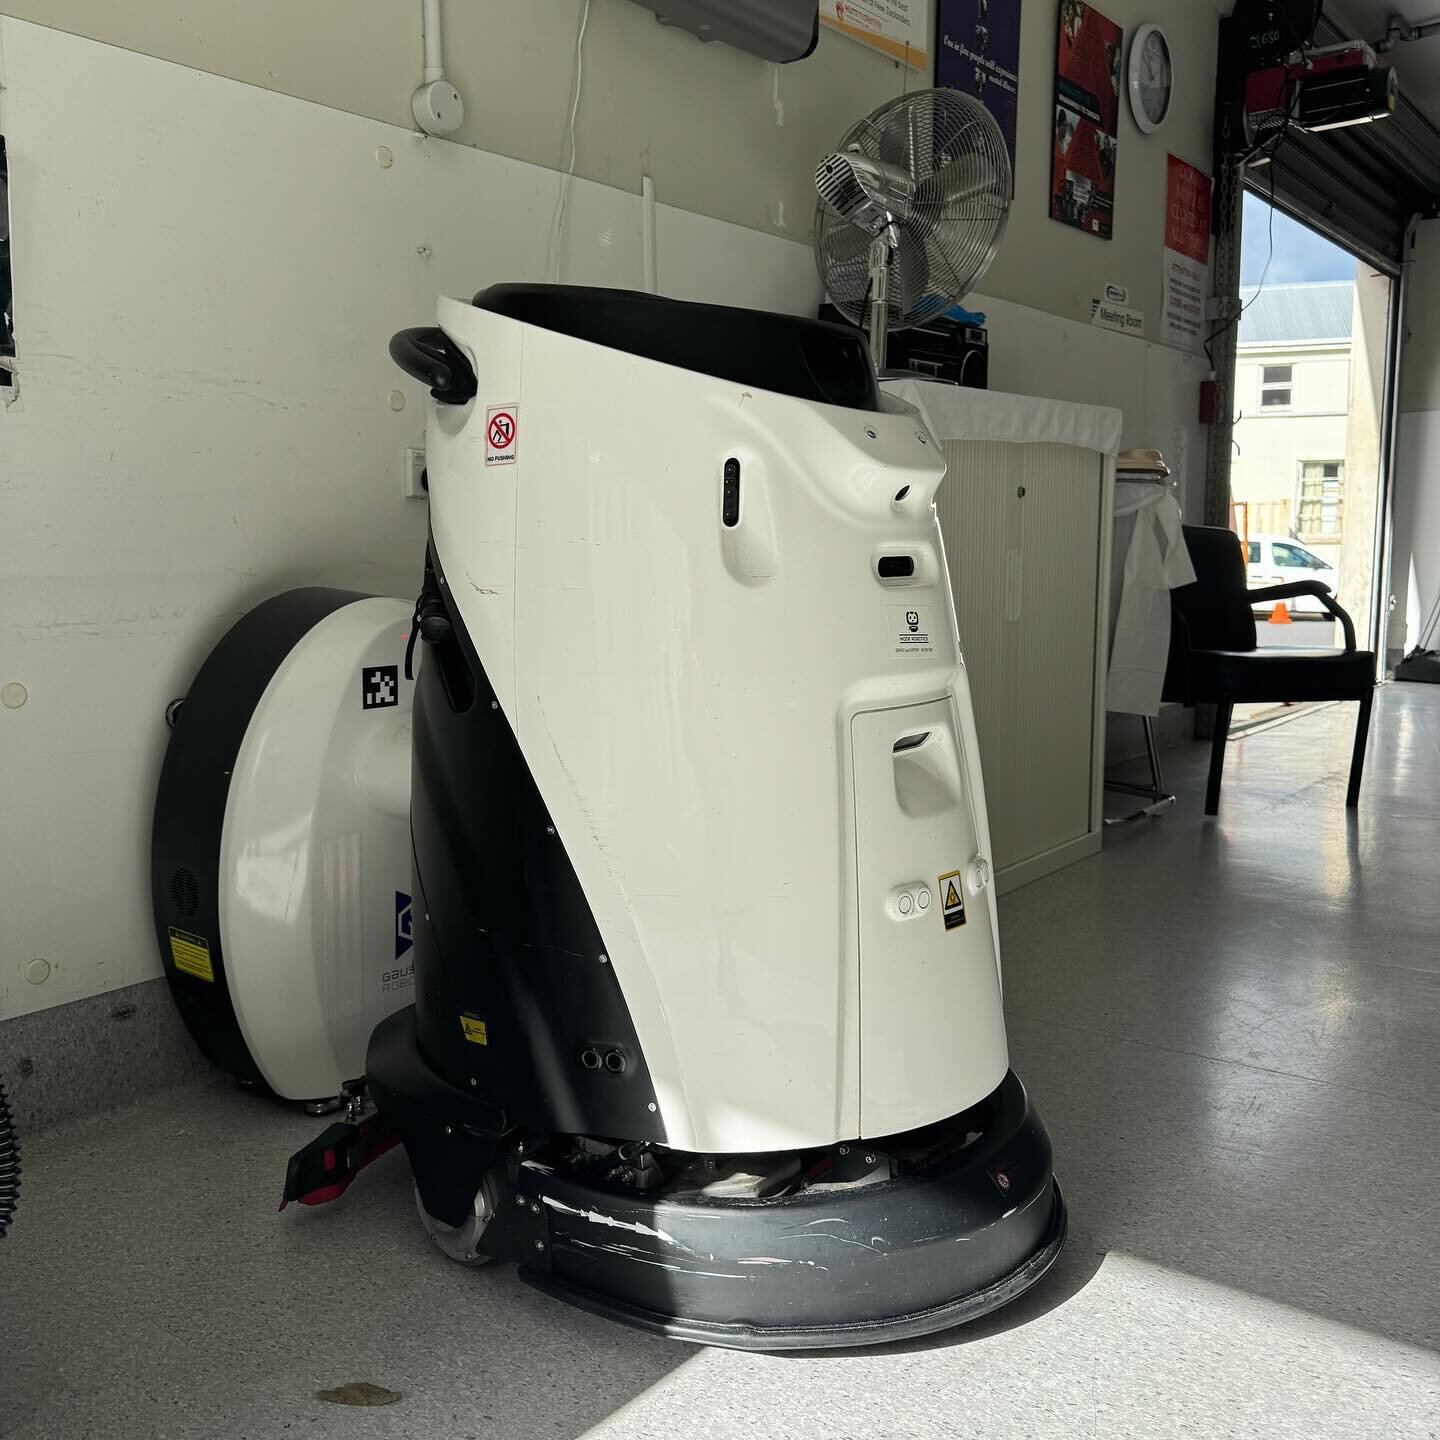 Introducing the Scrubber50 robot&mdash;revolutionizing cleaning efficiency like never before! 

Say goodbye to manual labor and hello to automated brilliance. Our Scrubber50 comes fully equipped with its own docking station, allowing for seamless ope